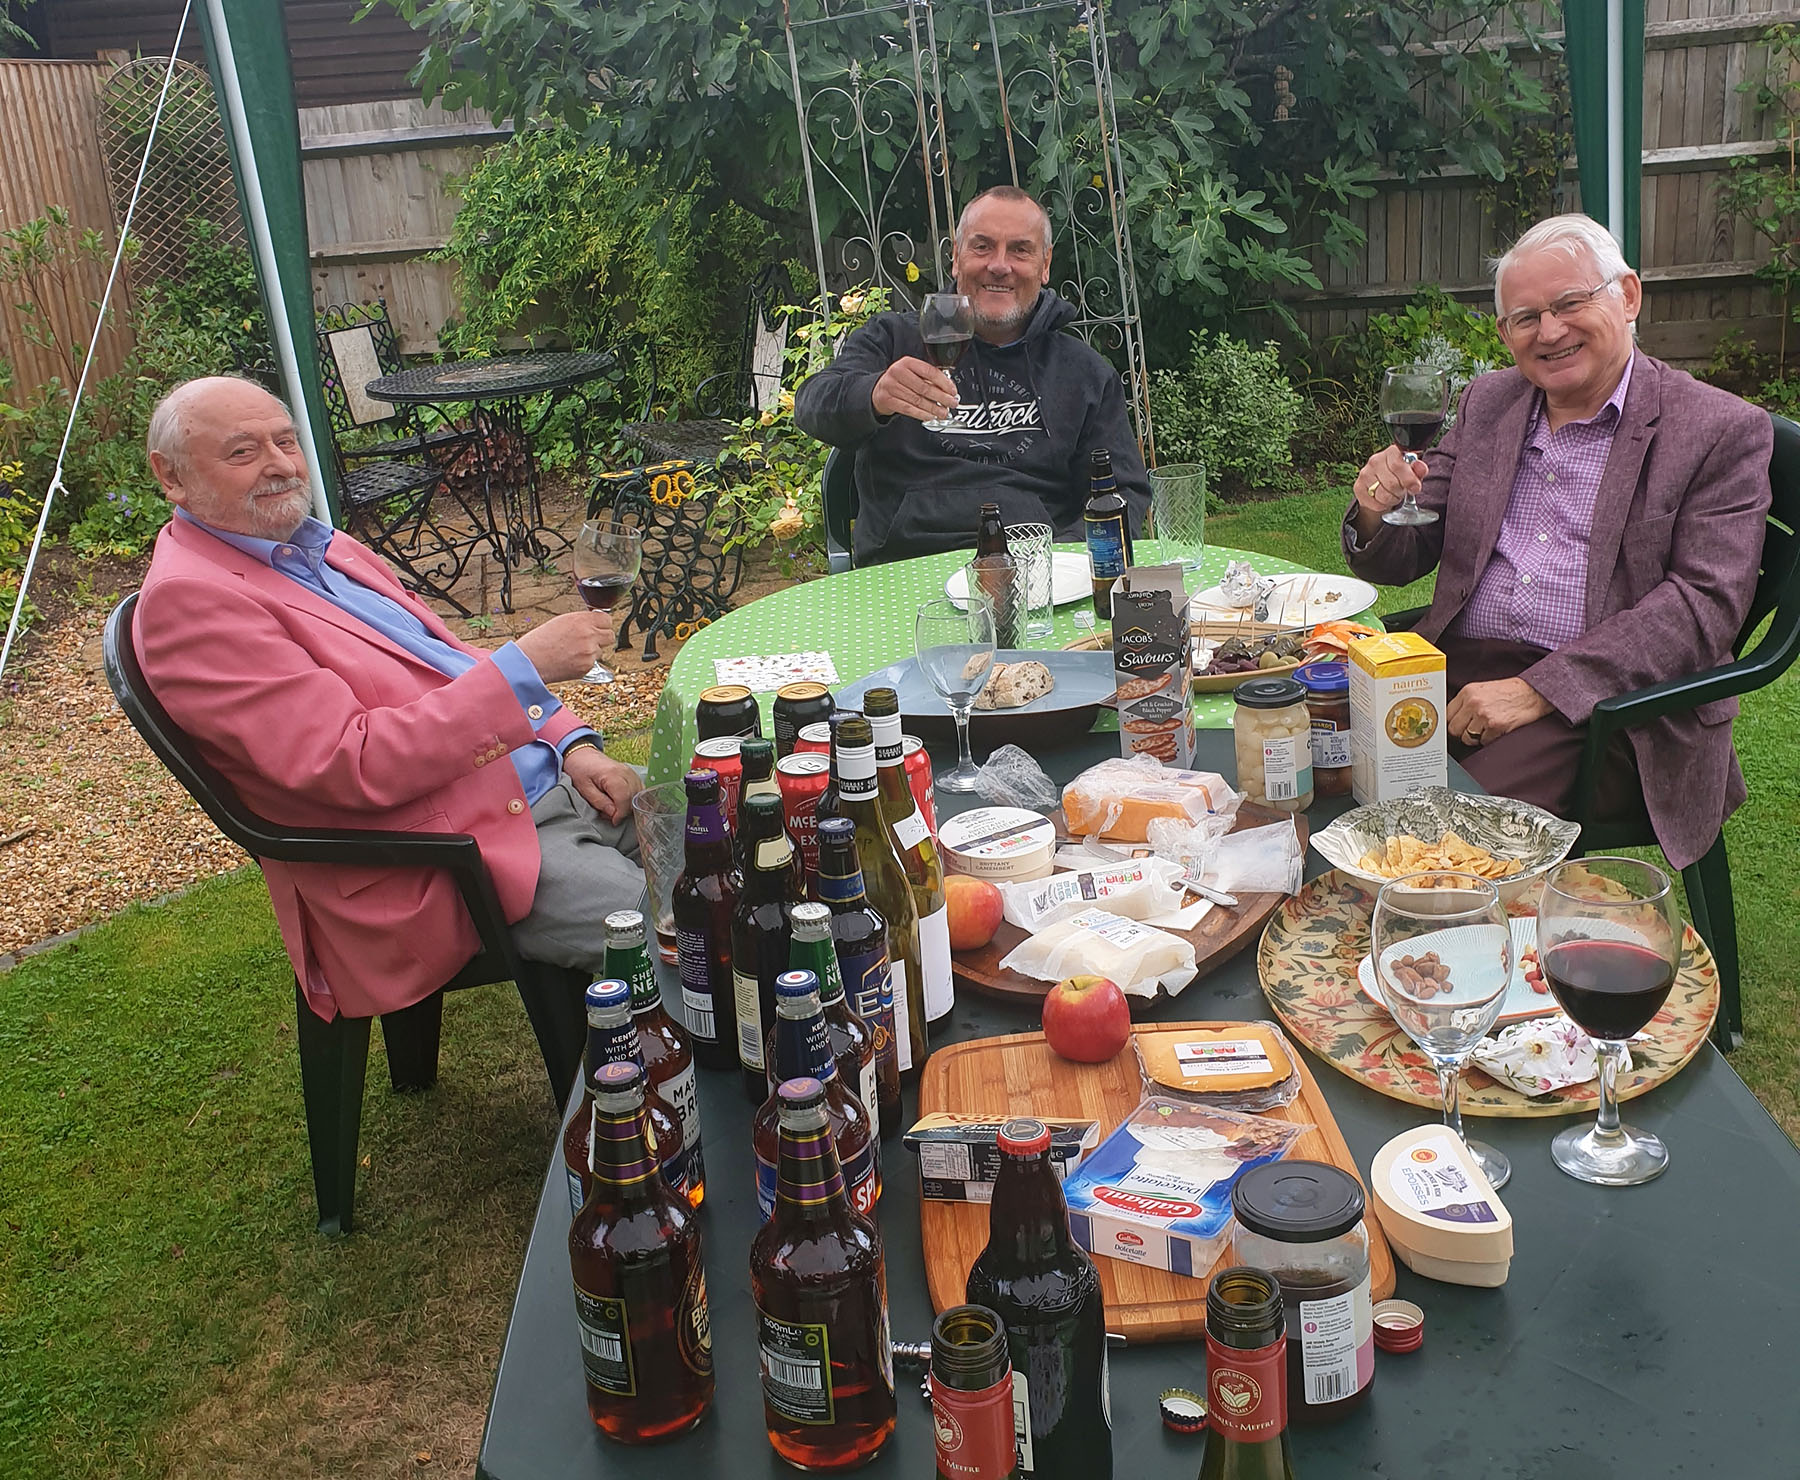 More Get Togethers at Halfpenny Close